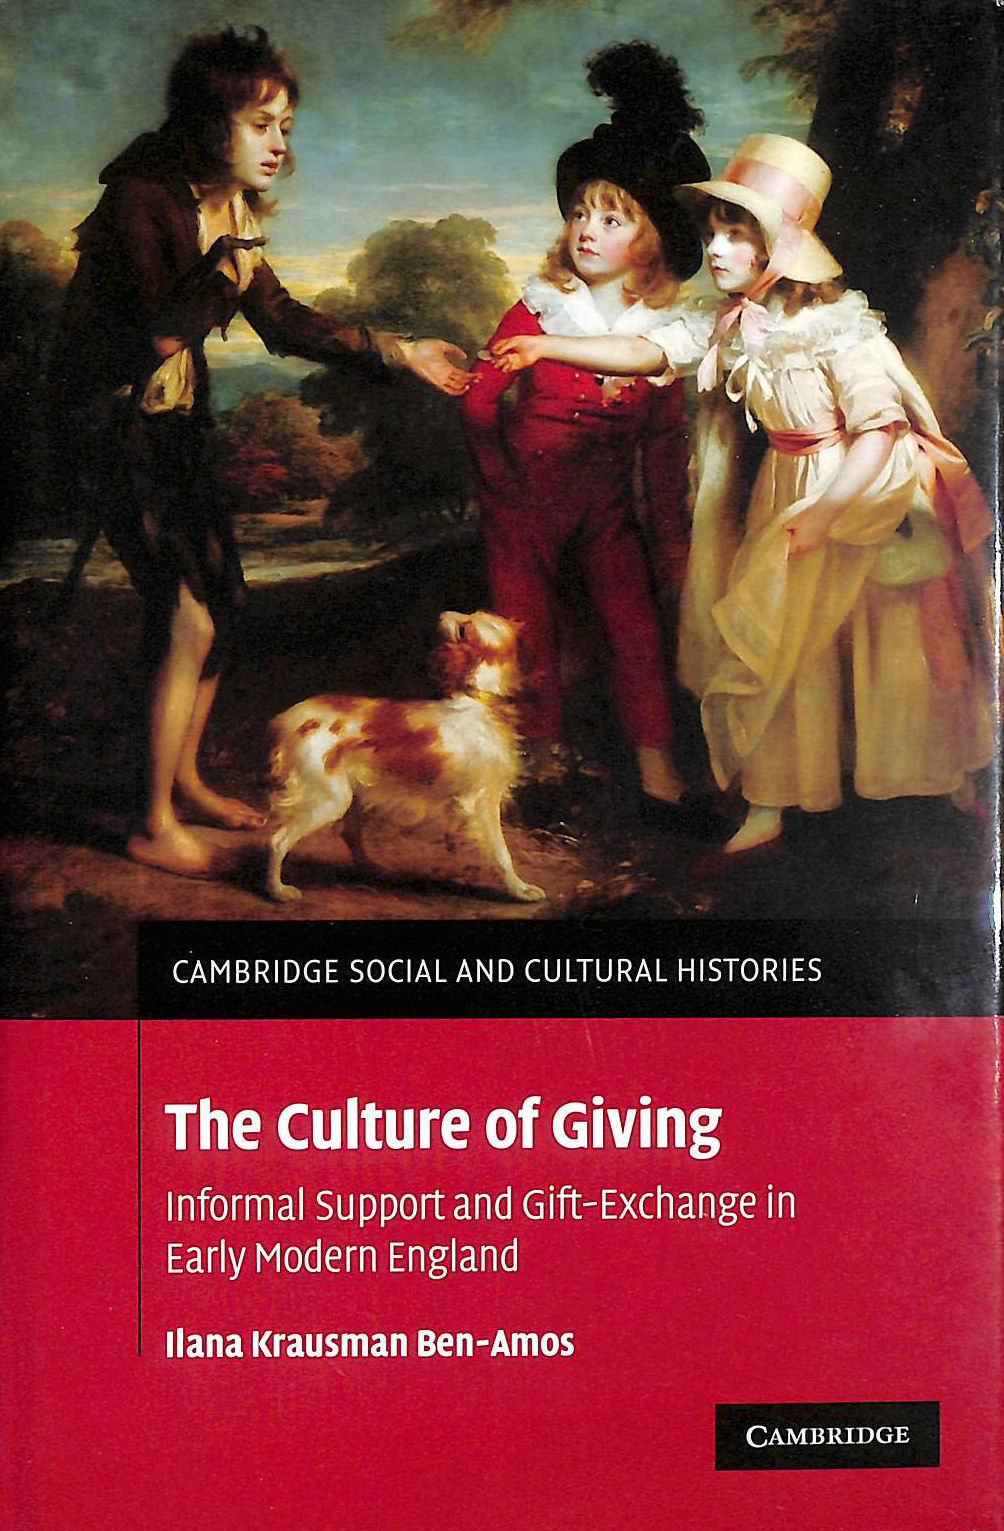 BEN-AMOS, ILANA KRAUSMAN - The Culture of Giving: Informal Support and Gift-Exchange in Early Modern England: 12 (Cambridge Social and Cultural Histories, Series Number 12)